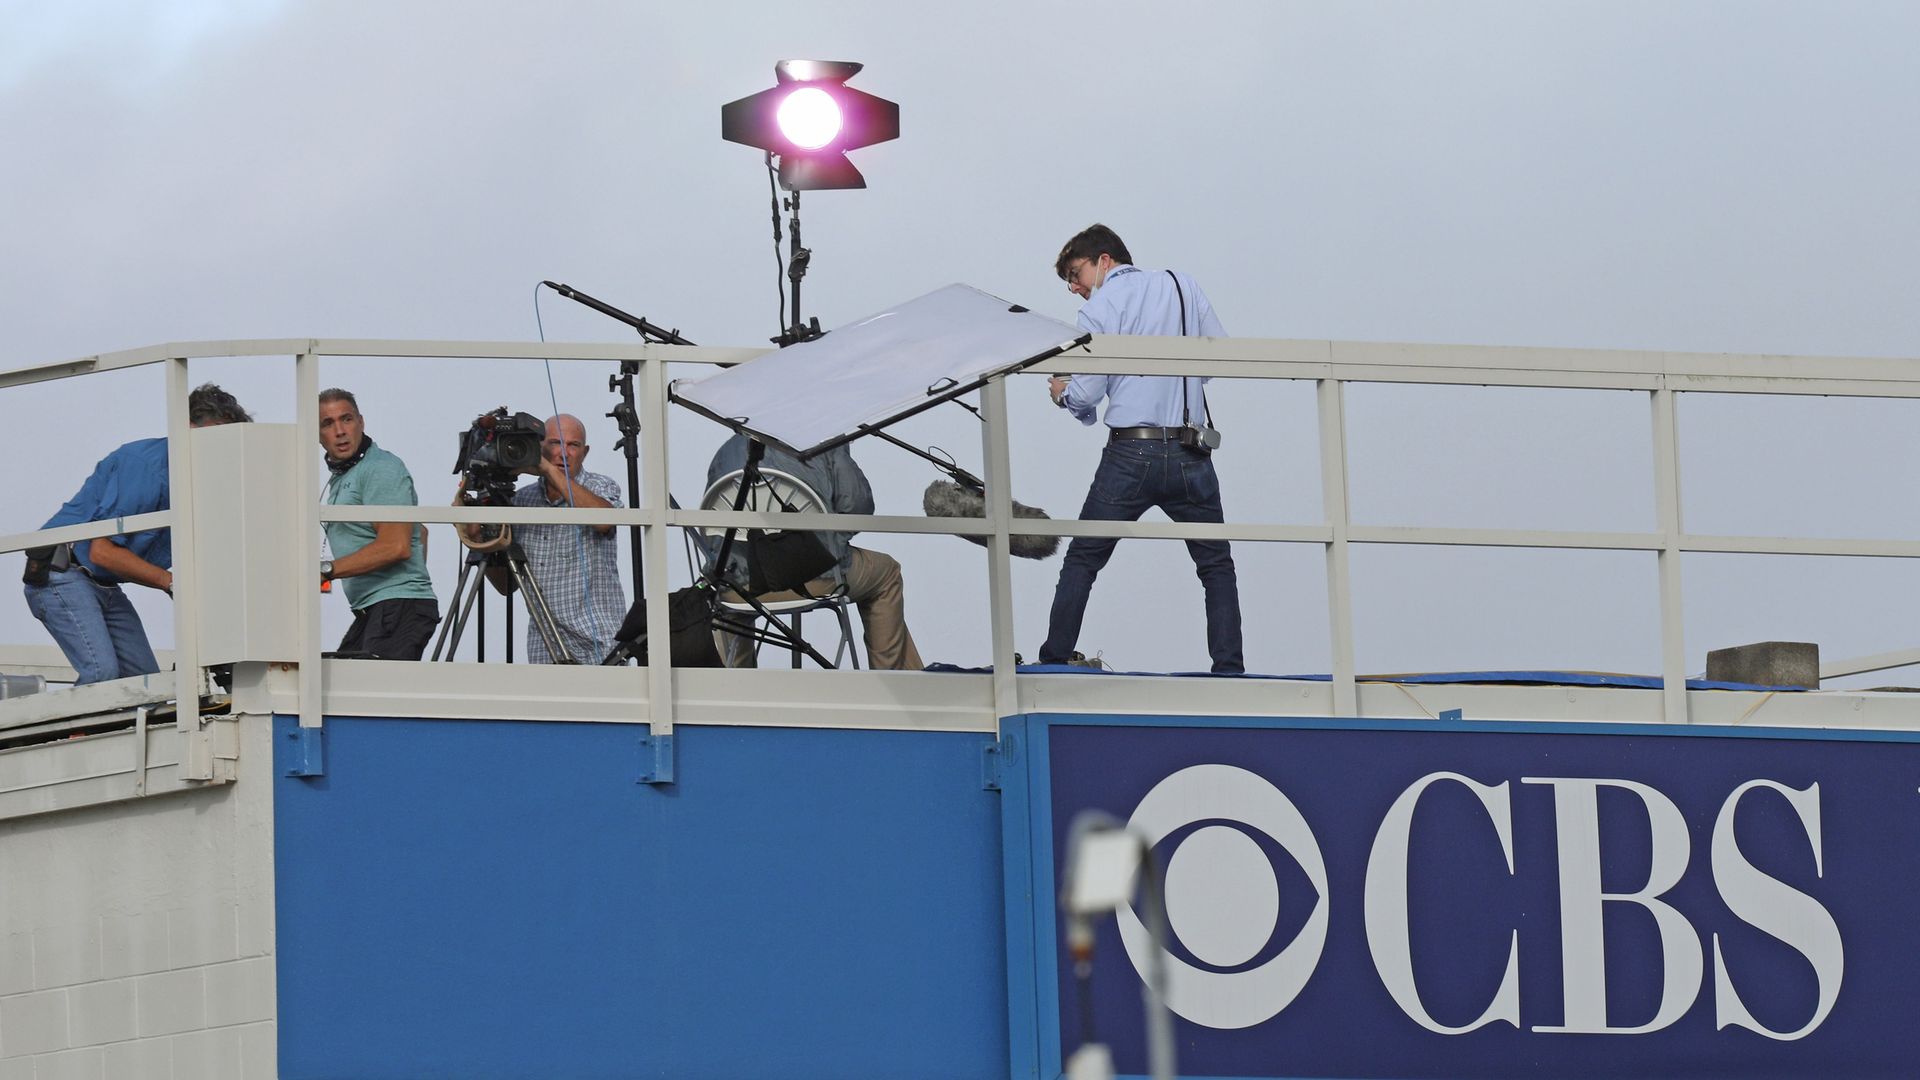 A CBS News crew looks on as a reflector topples over from the wind while preparing to broadcast at the Kennedy Space Center in Florida.